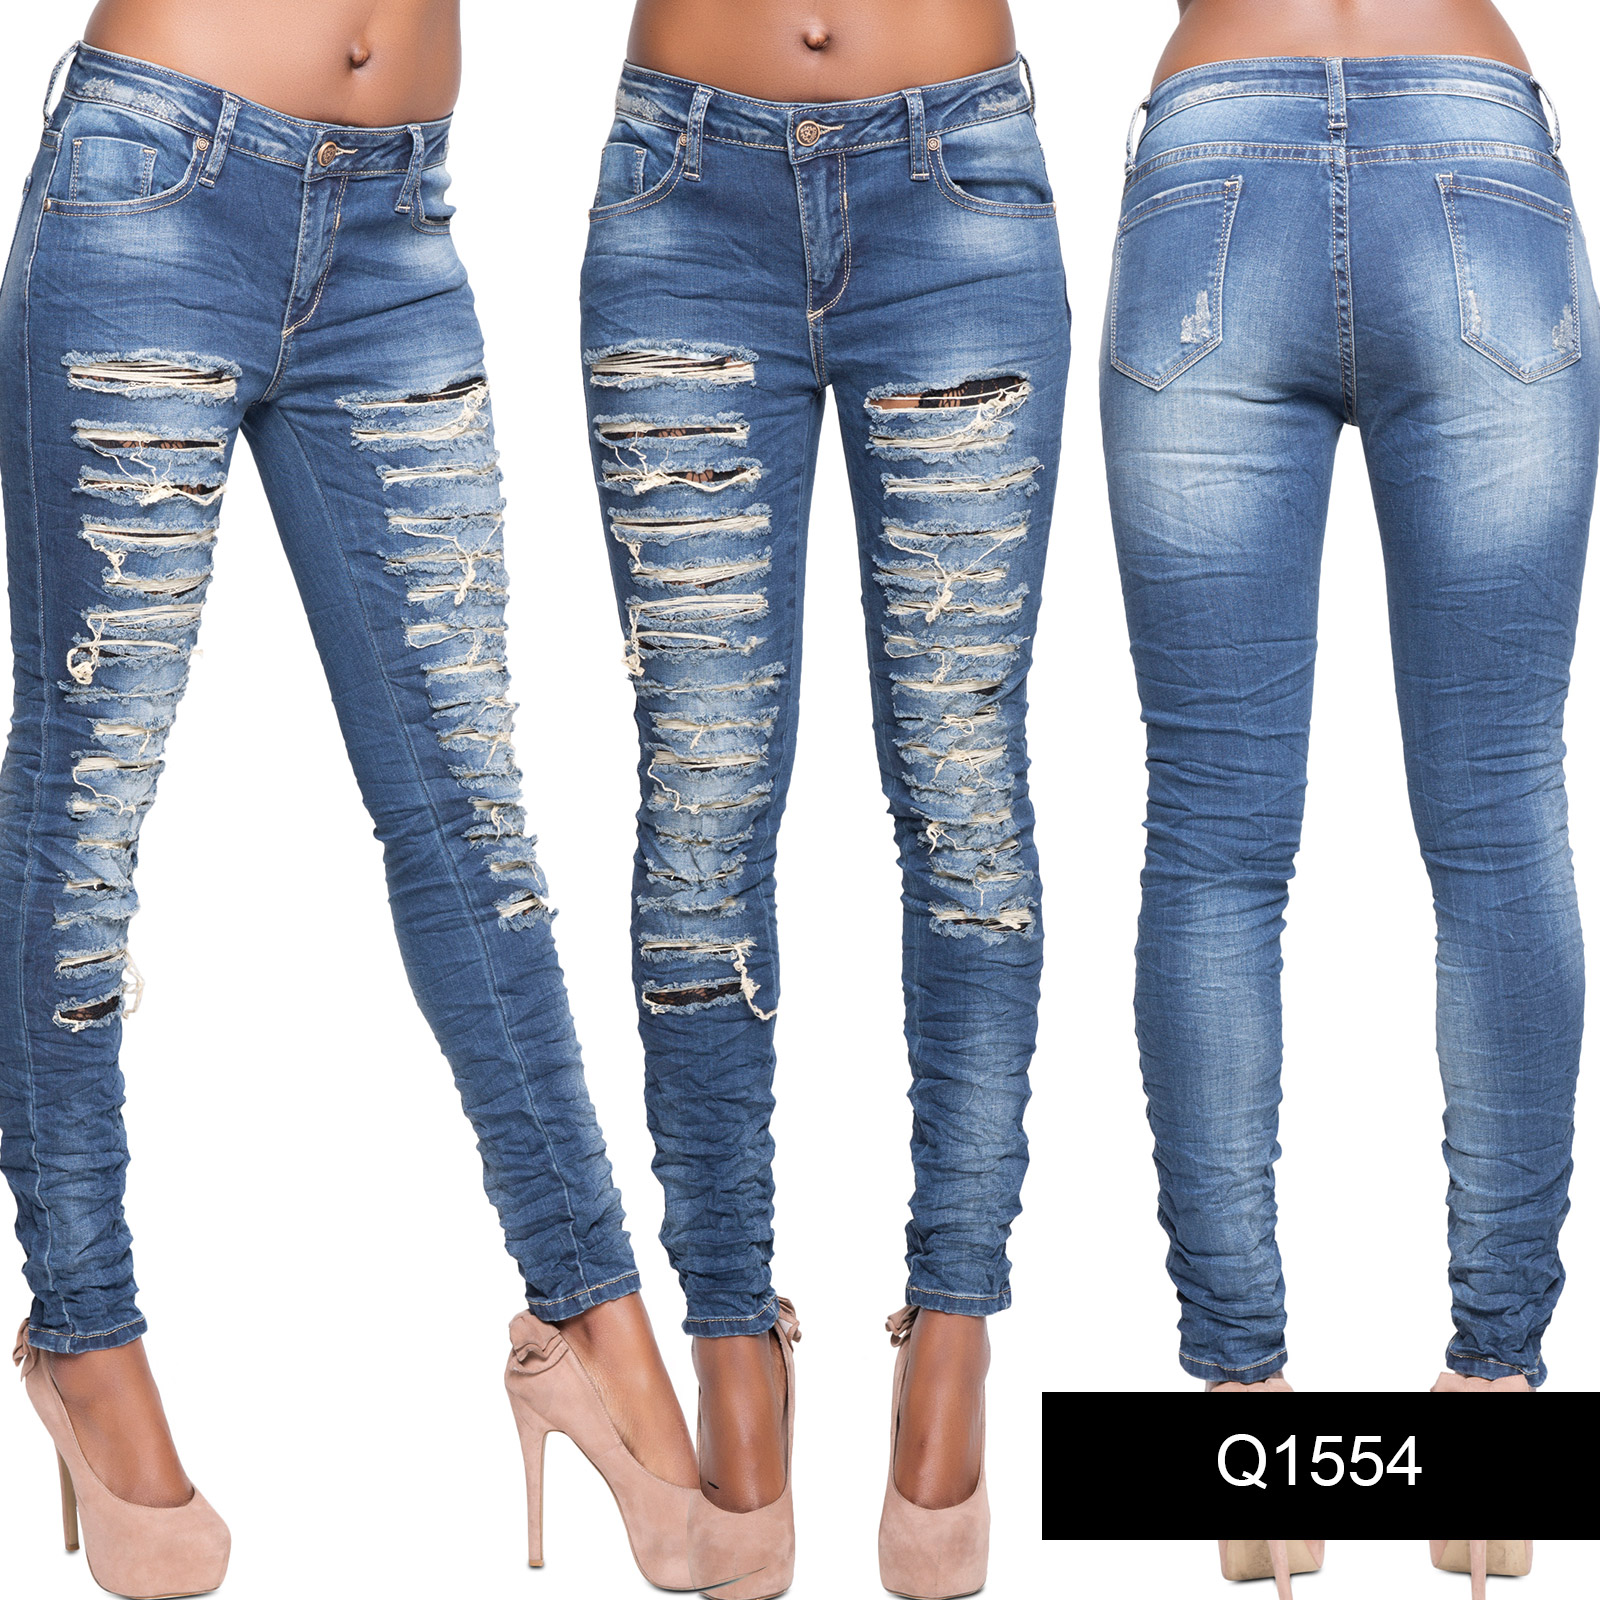 Womens Low Rise Sexy Lace Ripped Blue Denim Stretch Skinny Fit Jeans Size 6 14 Ebay